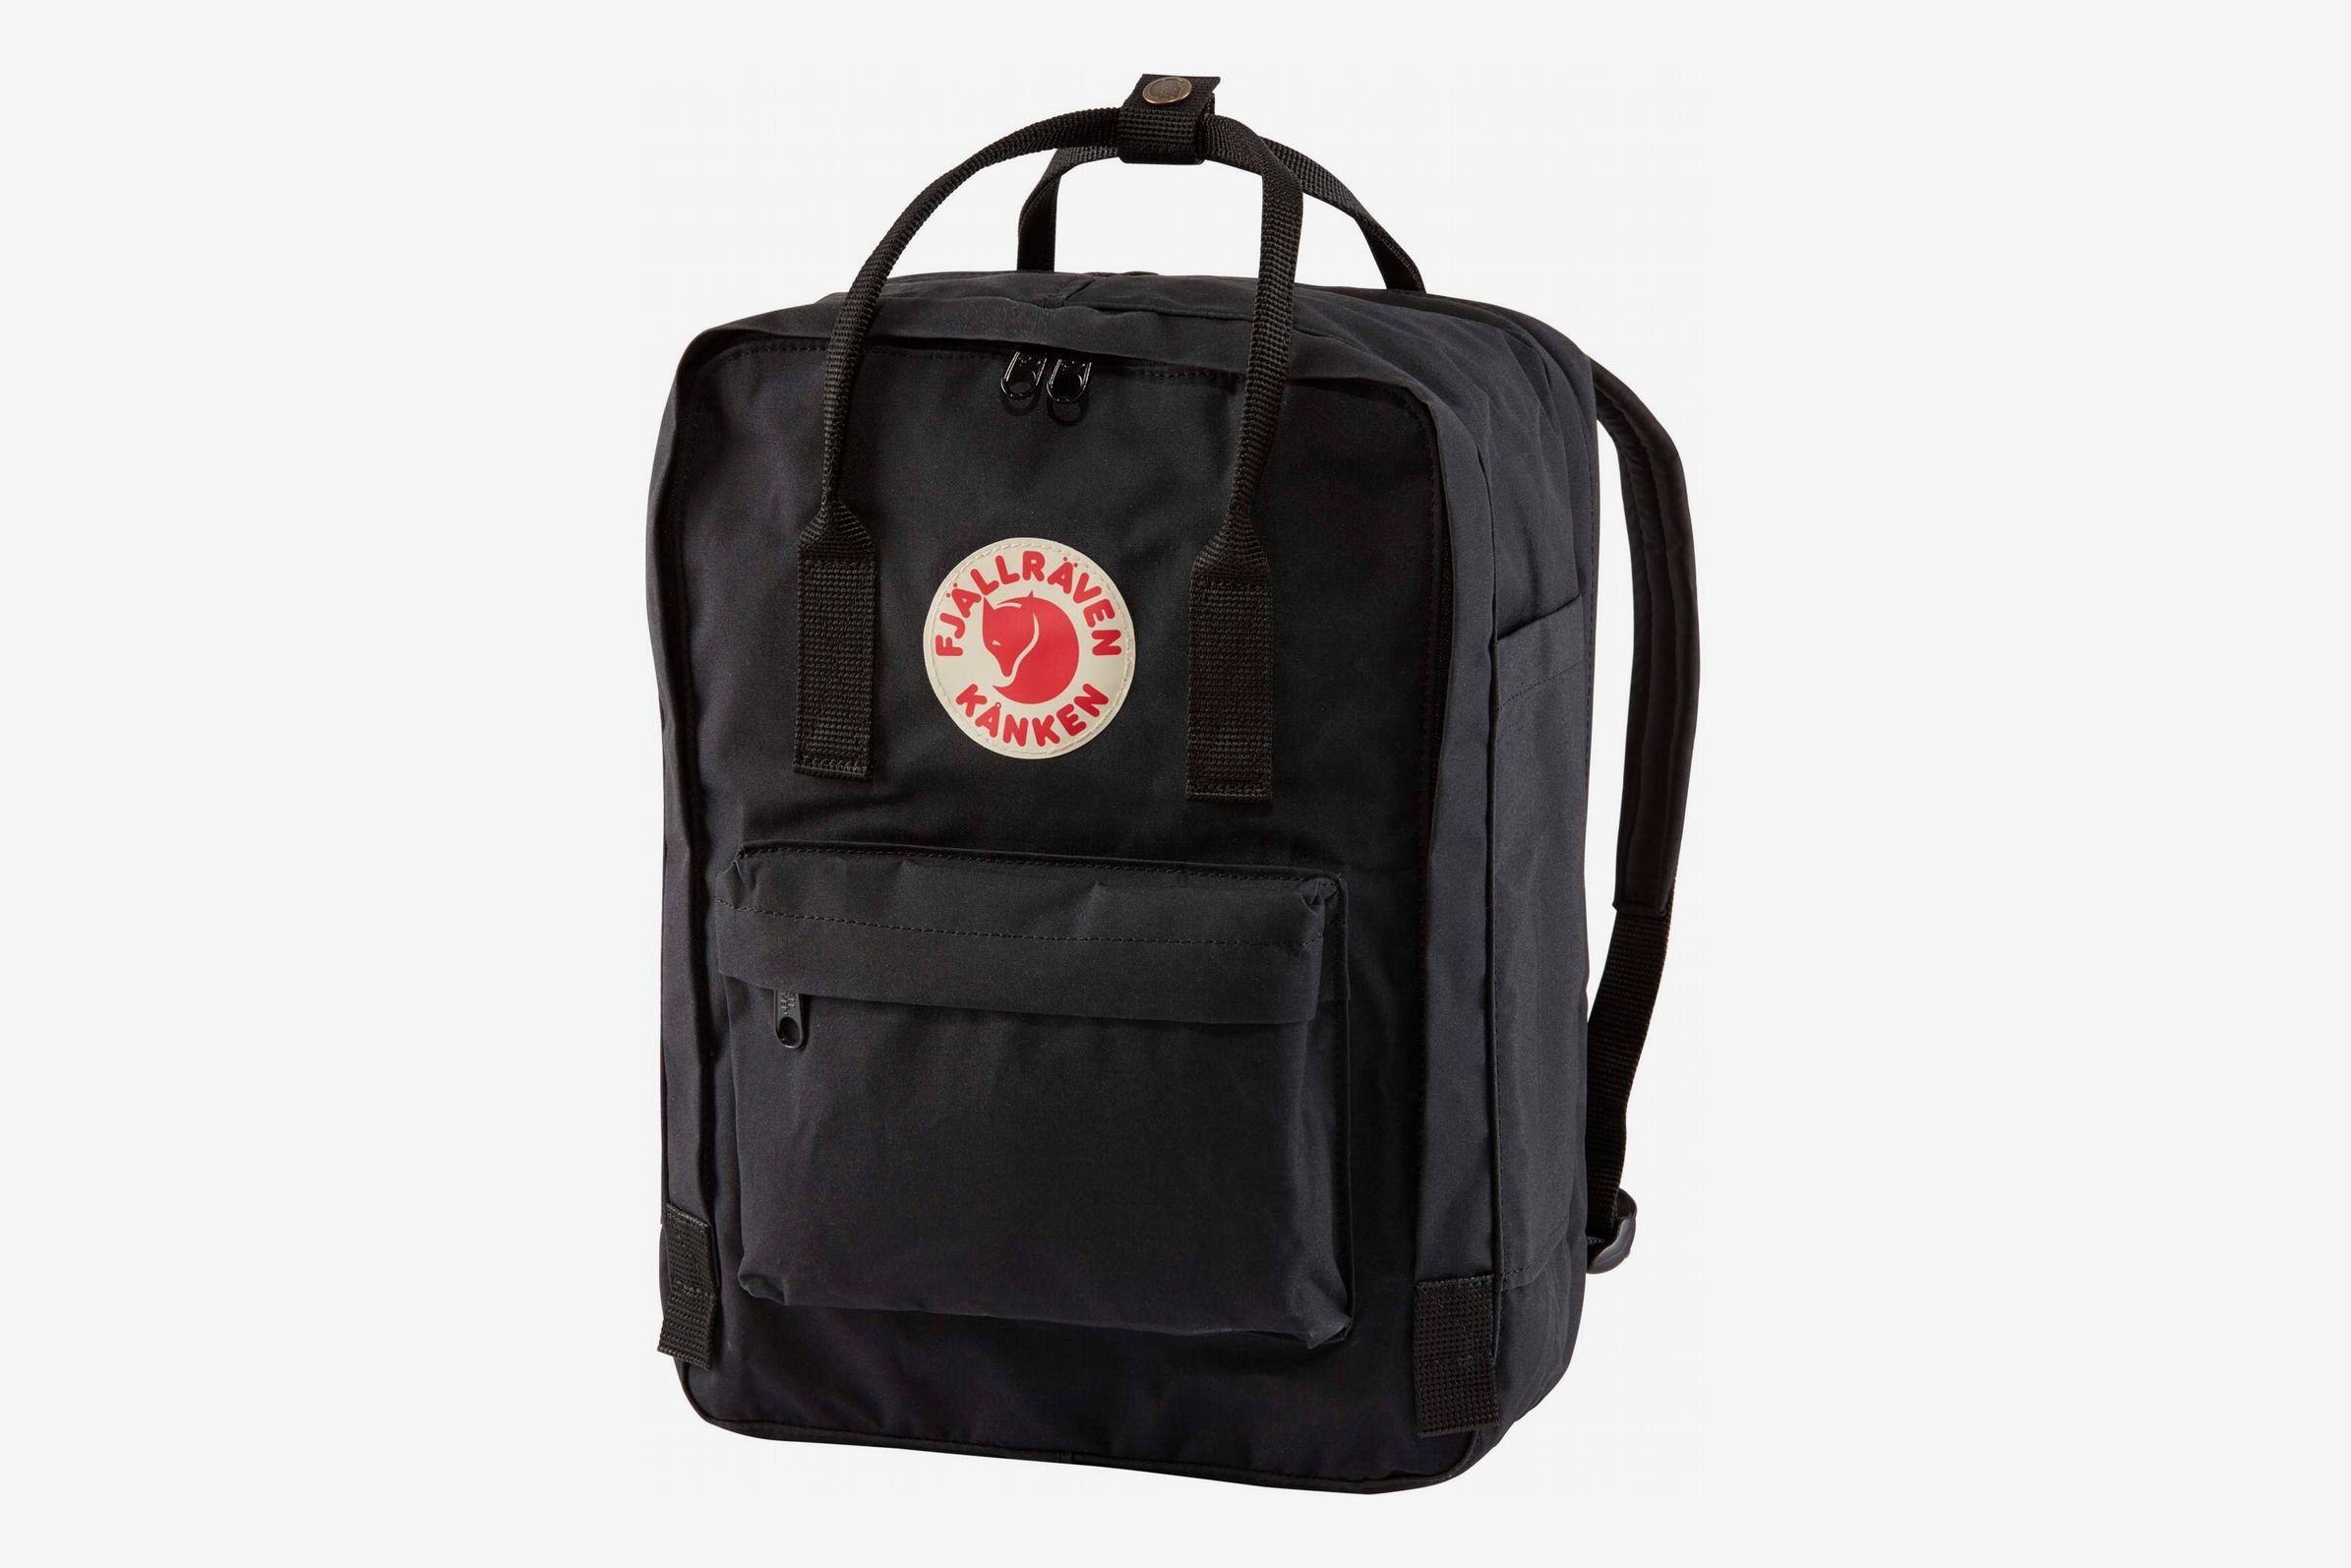 Thaw, thaw, frost thaw dishonest cry Fjällräven Kanken Laptop Backpack Review 2019 | The Strategist